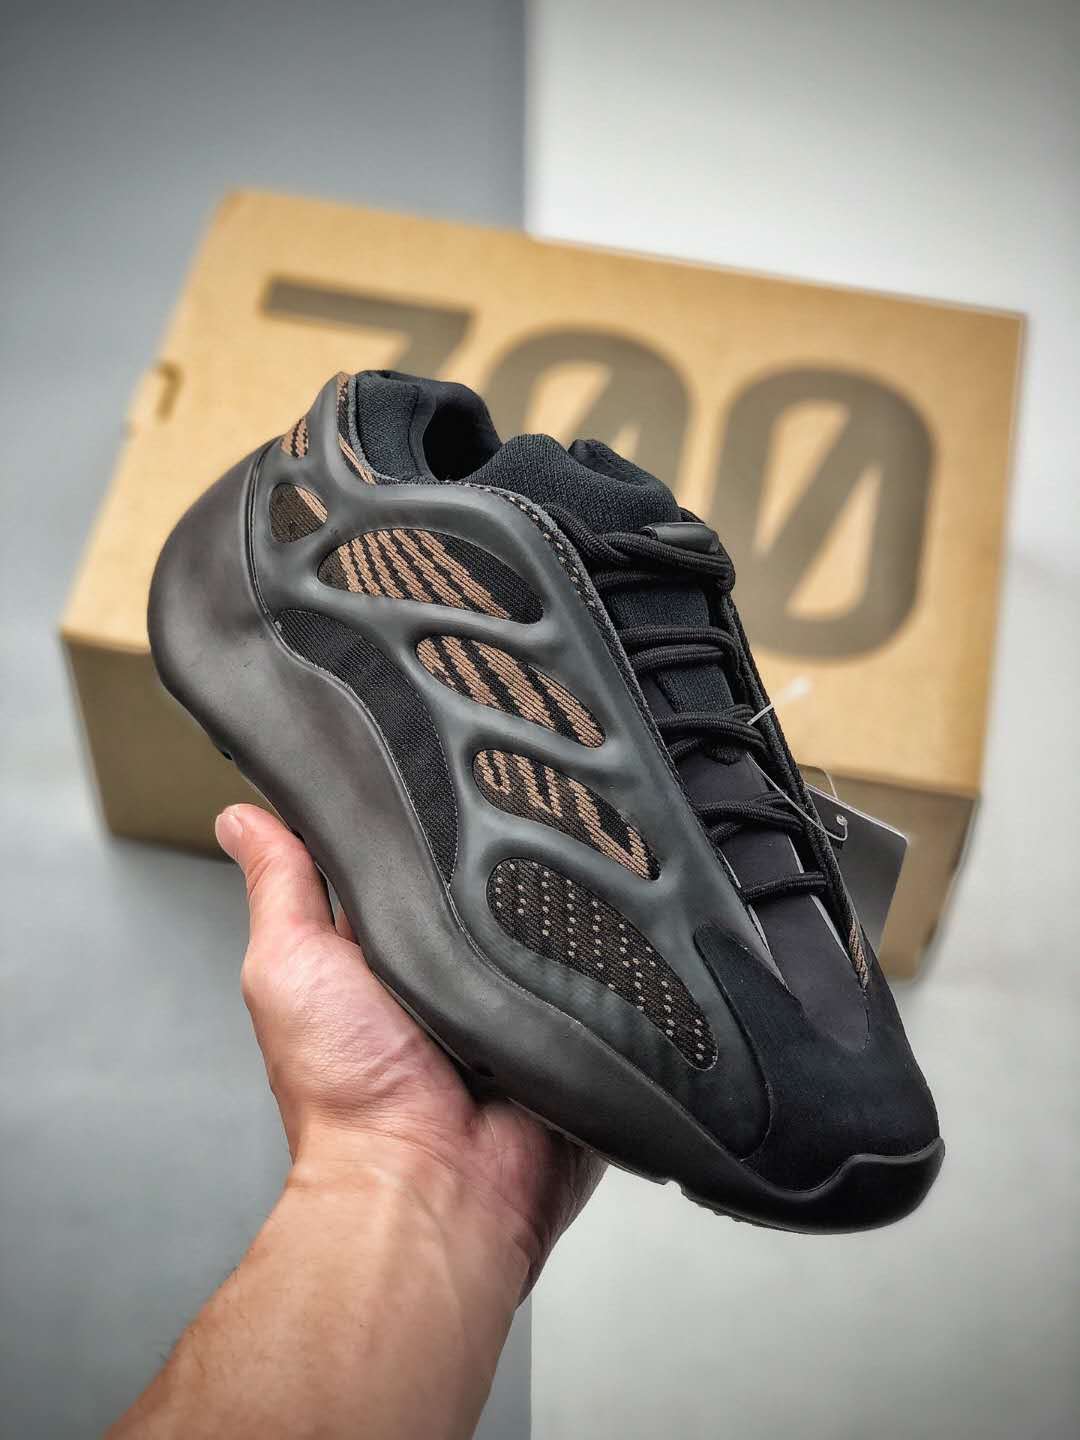 Adidas Yeezy 700 V3 'Clay Brown' GY0189 - Stylish Sneakers with Bold Aesthetic